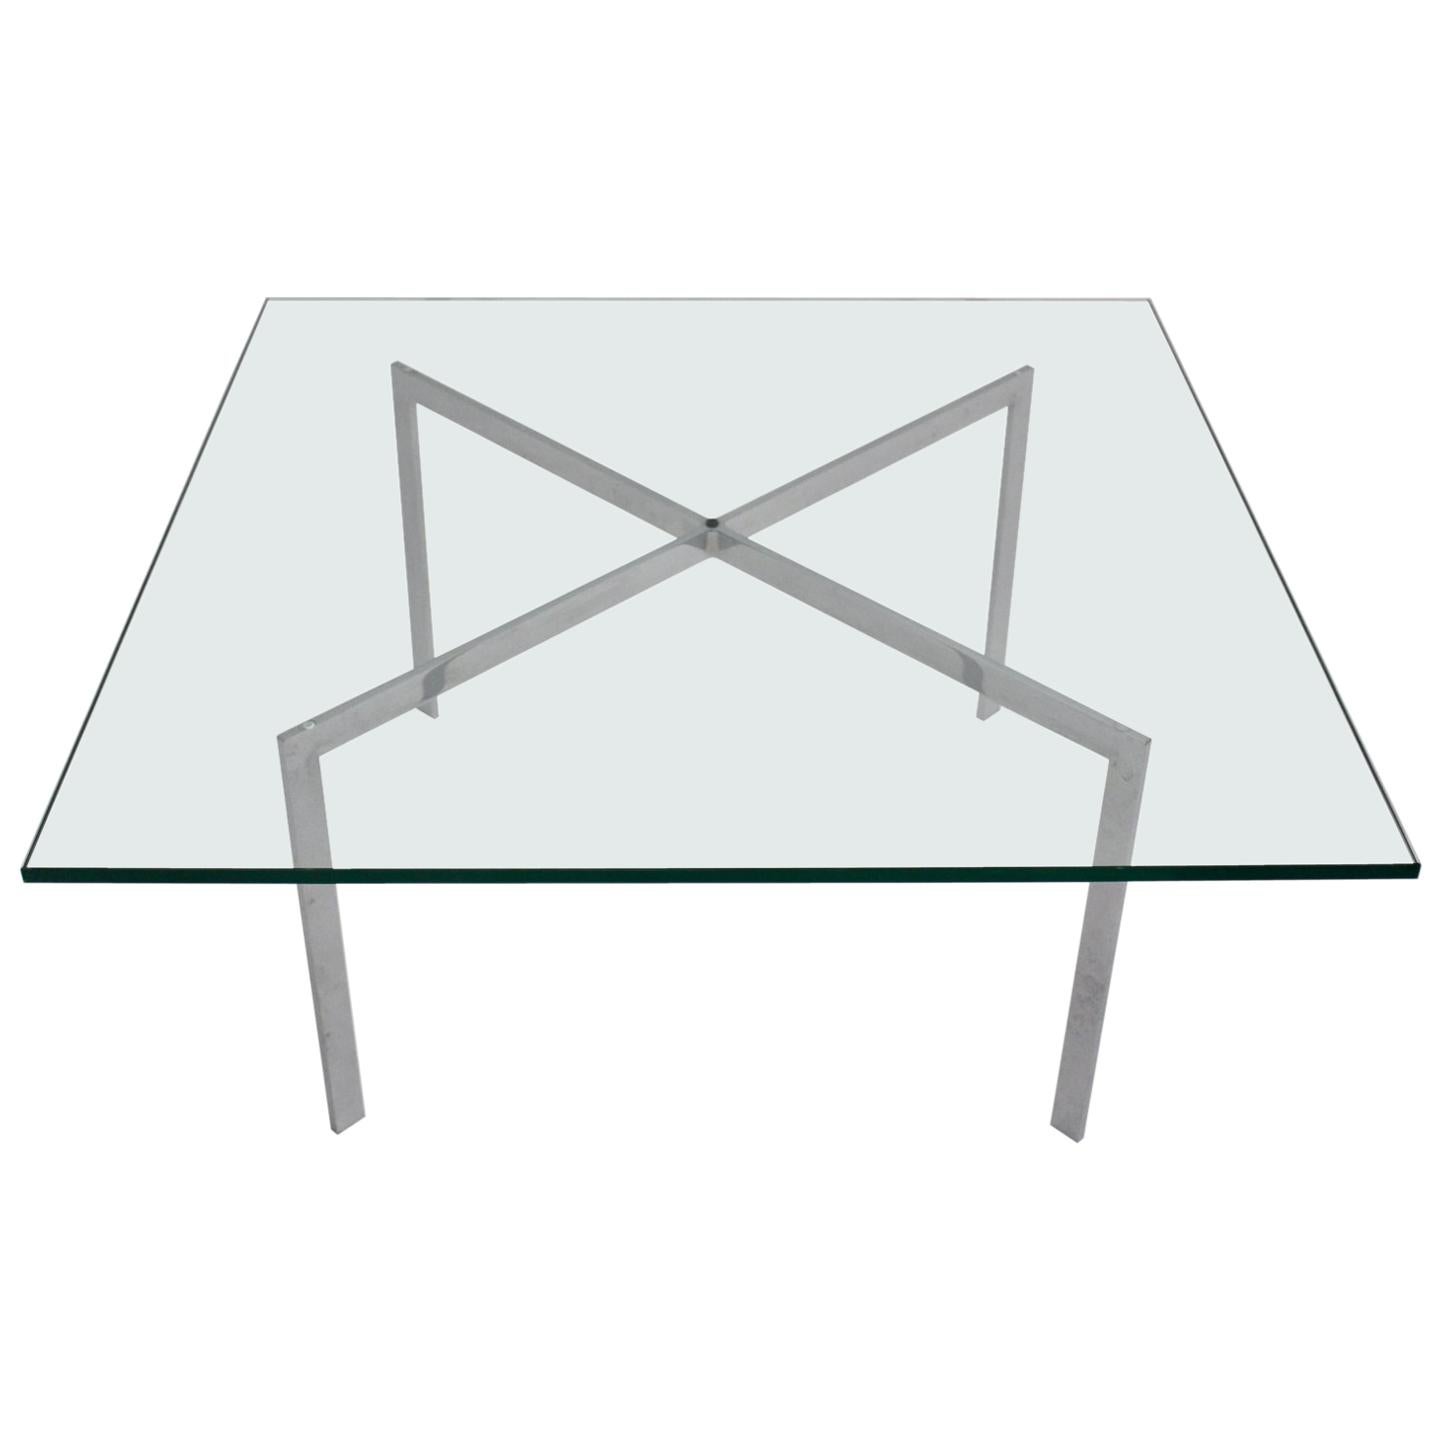 Bauhaus Vintage Chrome Glass Coffee Table Barcelona by Mies van der Rohe, 1929 For Sale